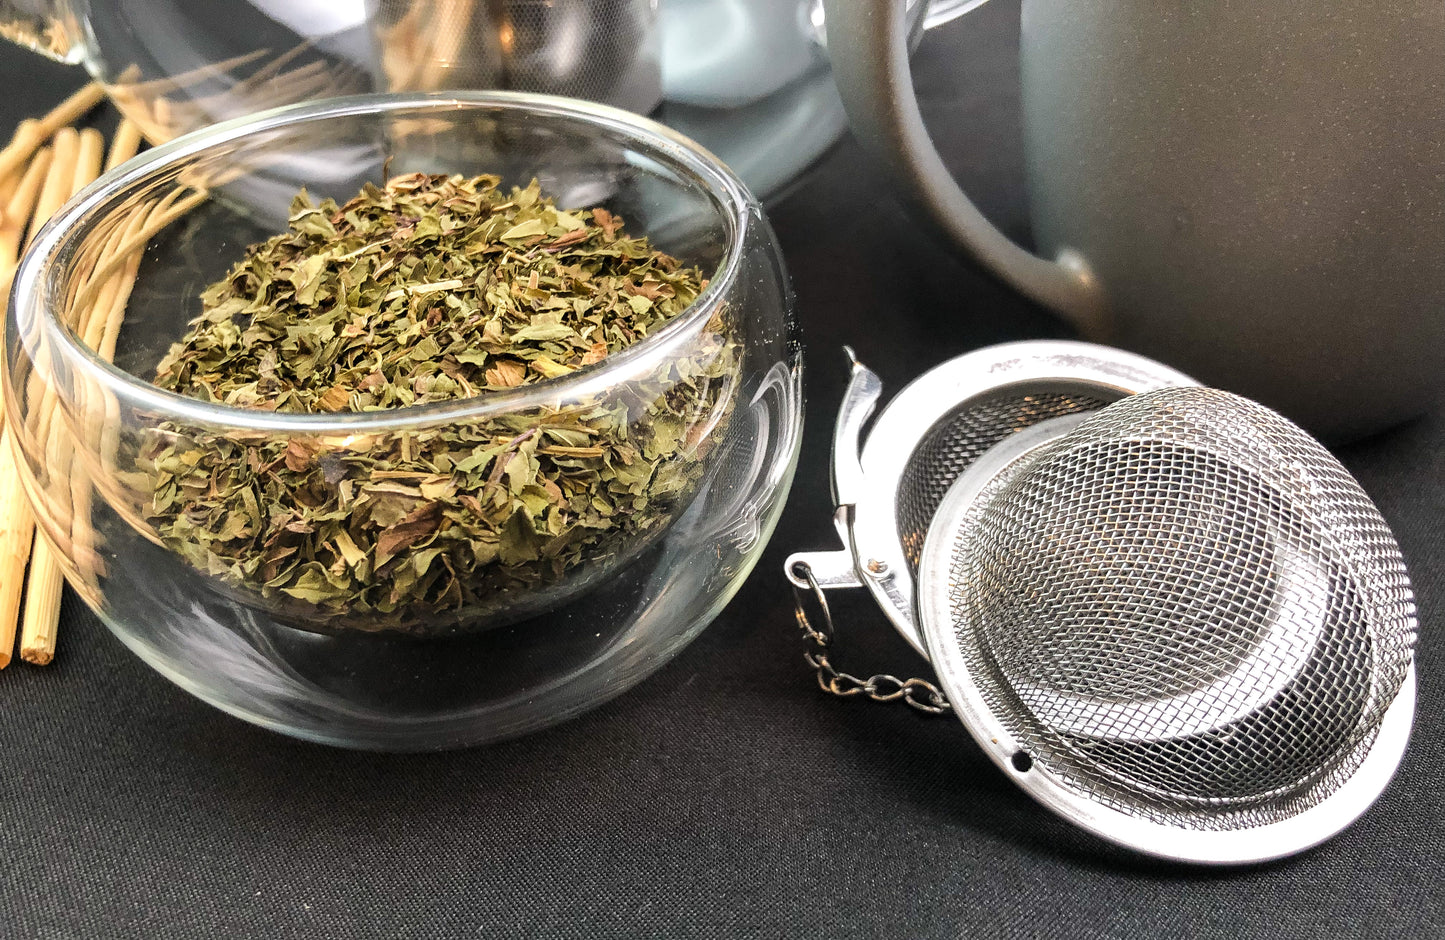 upclose image of dried peppermint in a clear glass cup next to a mesh tea infuser with black background and other items in the background